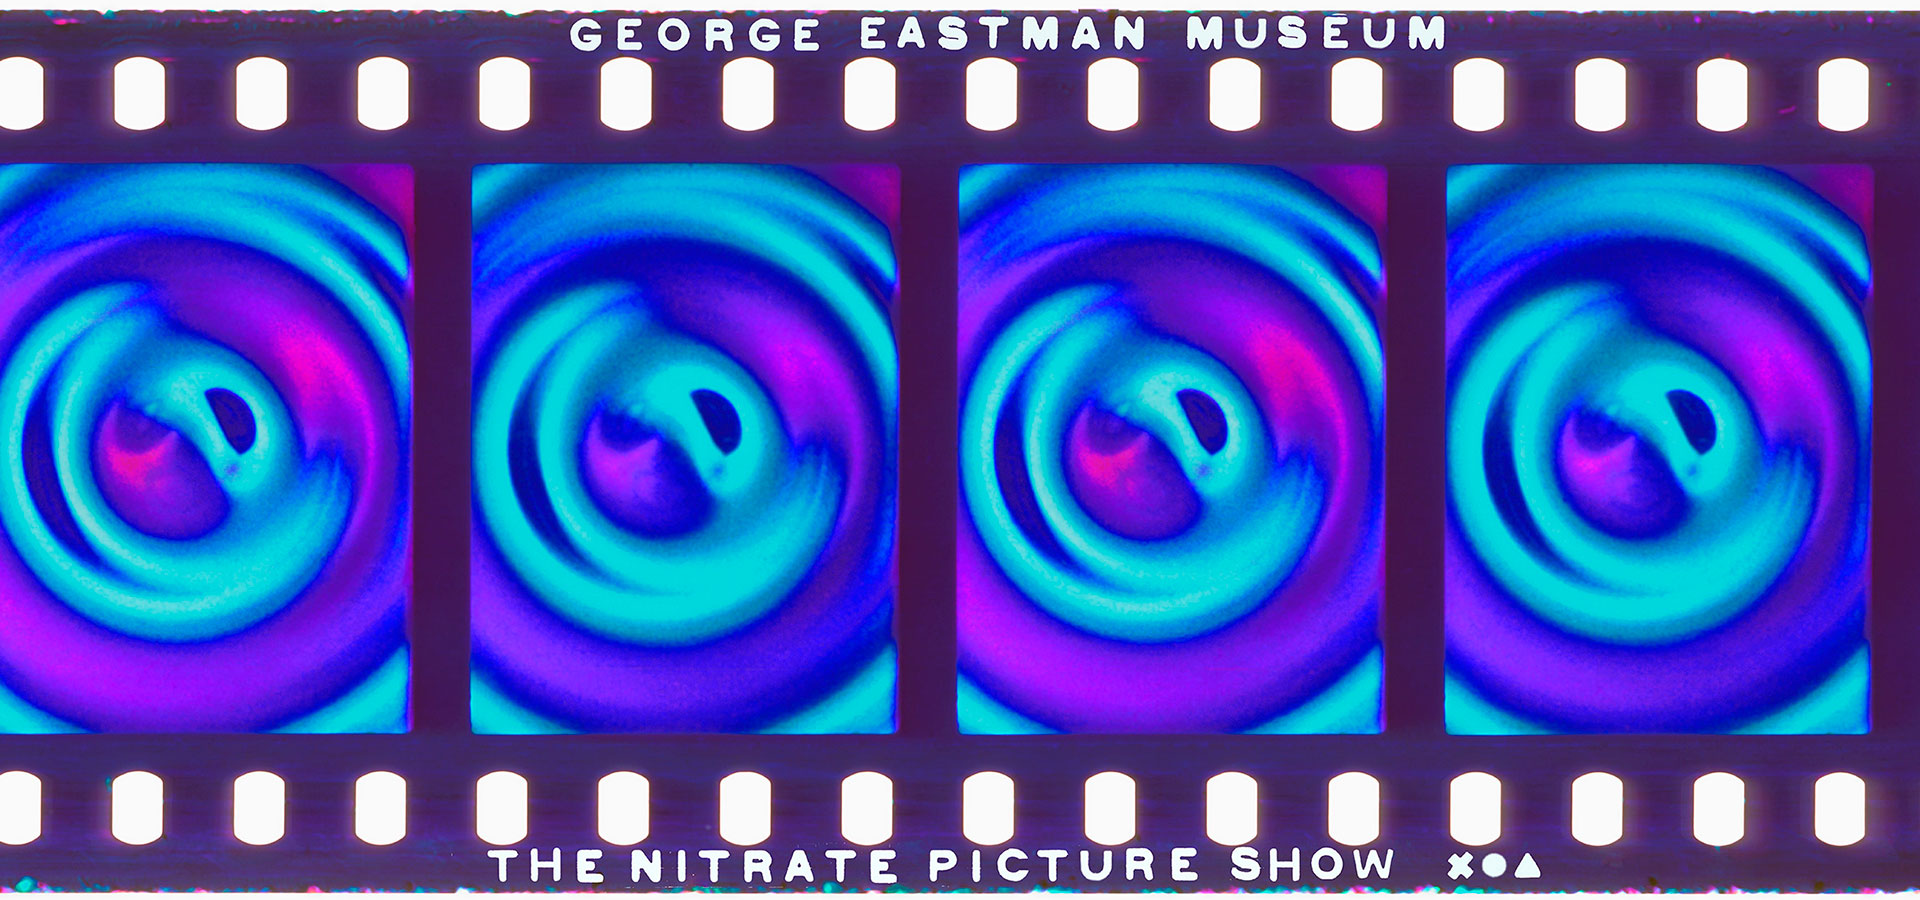 Nitrate Picture Show logo